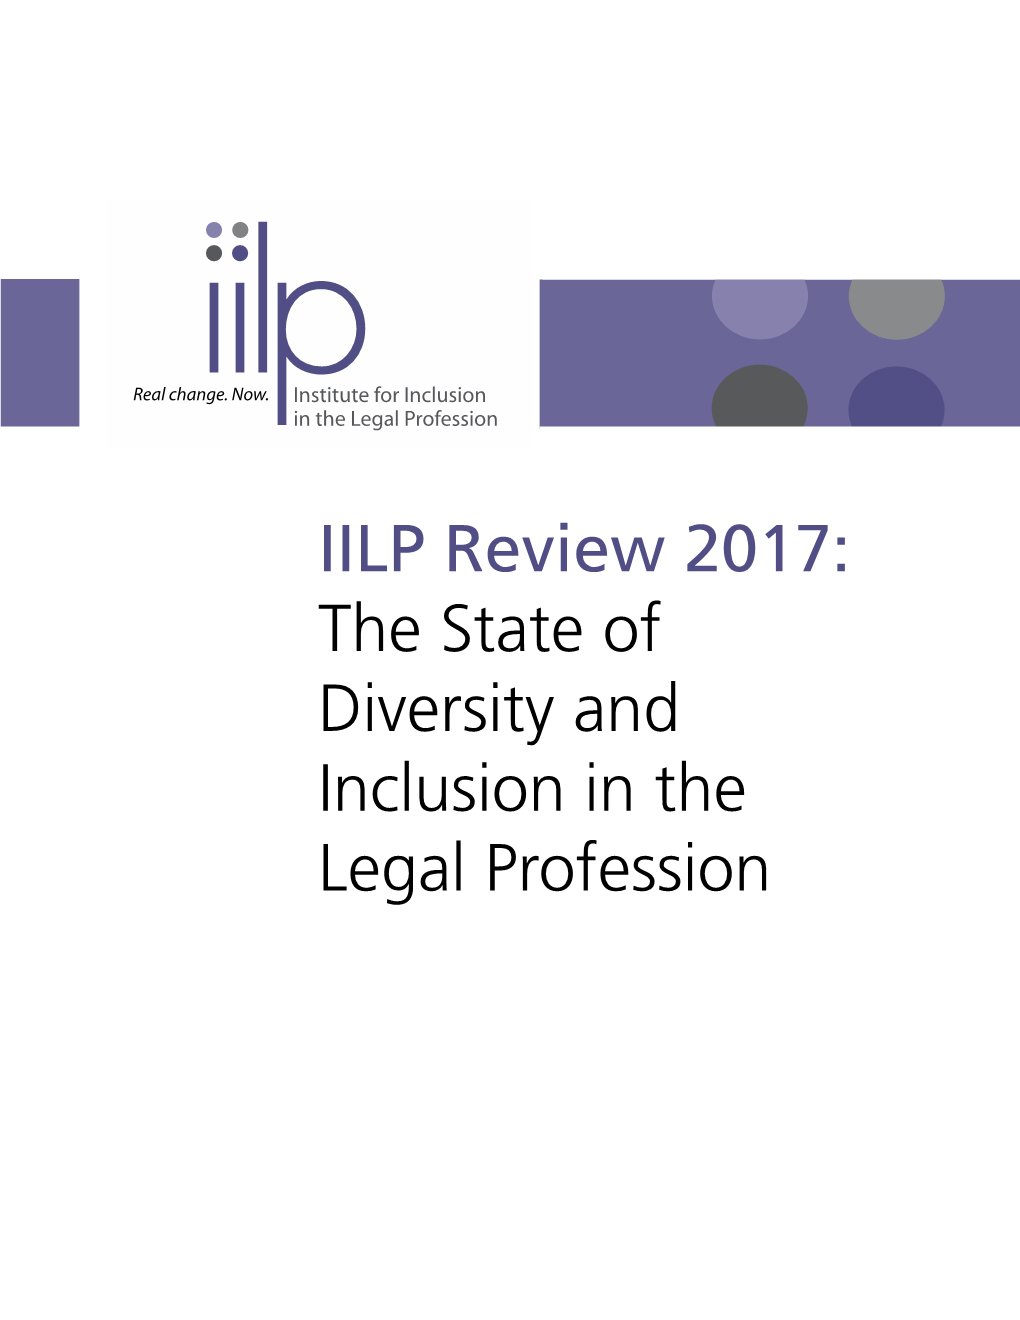 IILP Review 2017: the State of Diversity and Inclusion in the Legal Profession © 2017 Institute for Inclusion in the Legal Profession All Rights Reserved